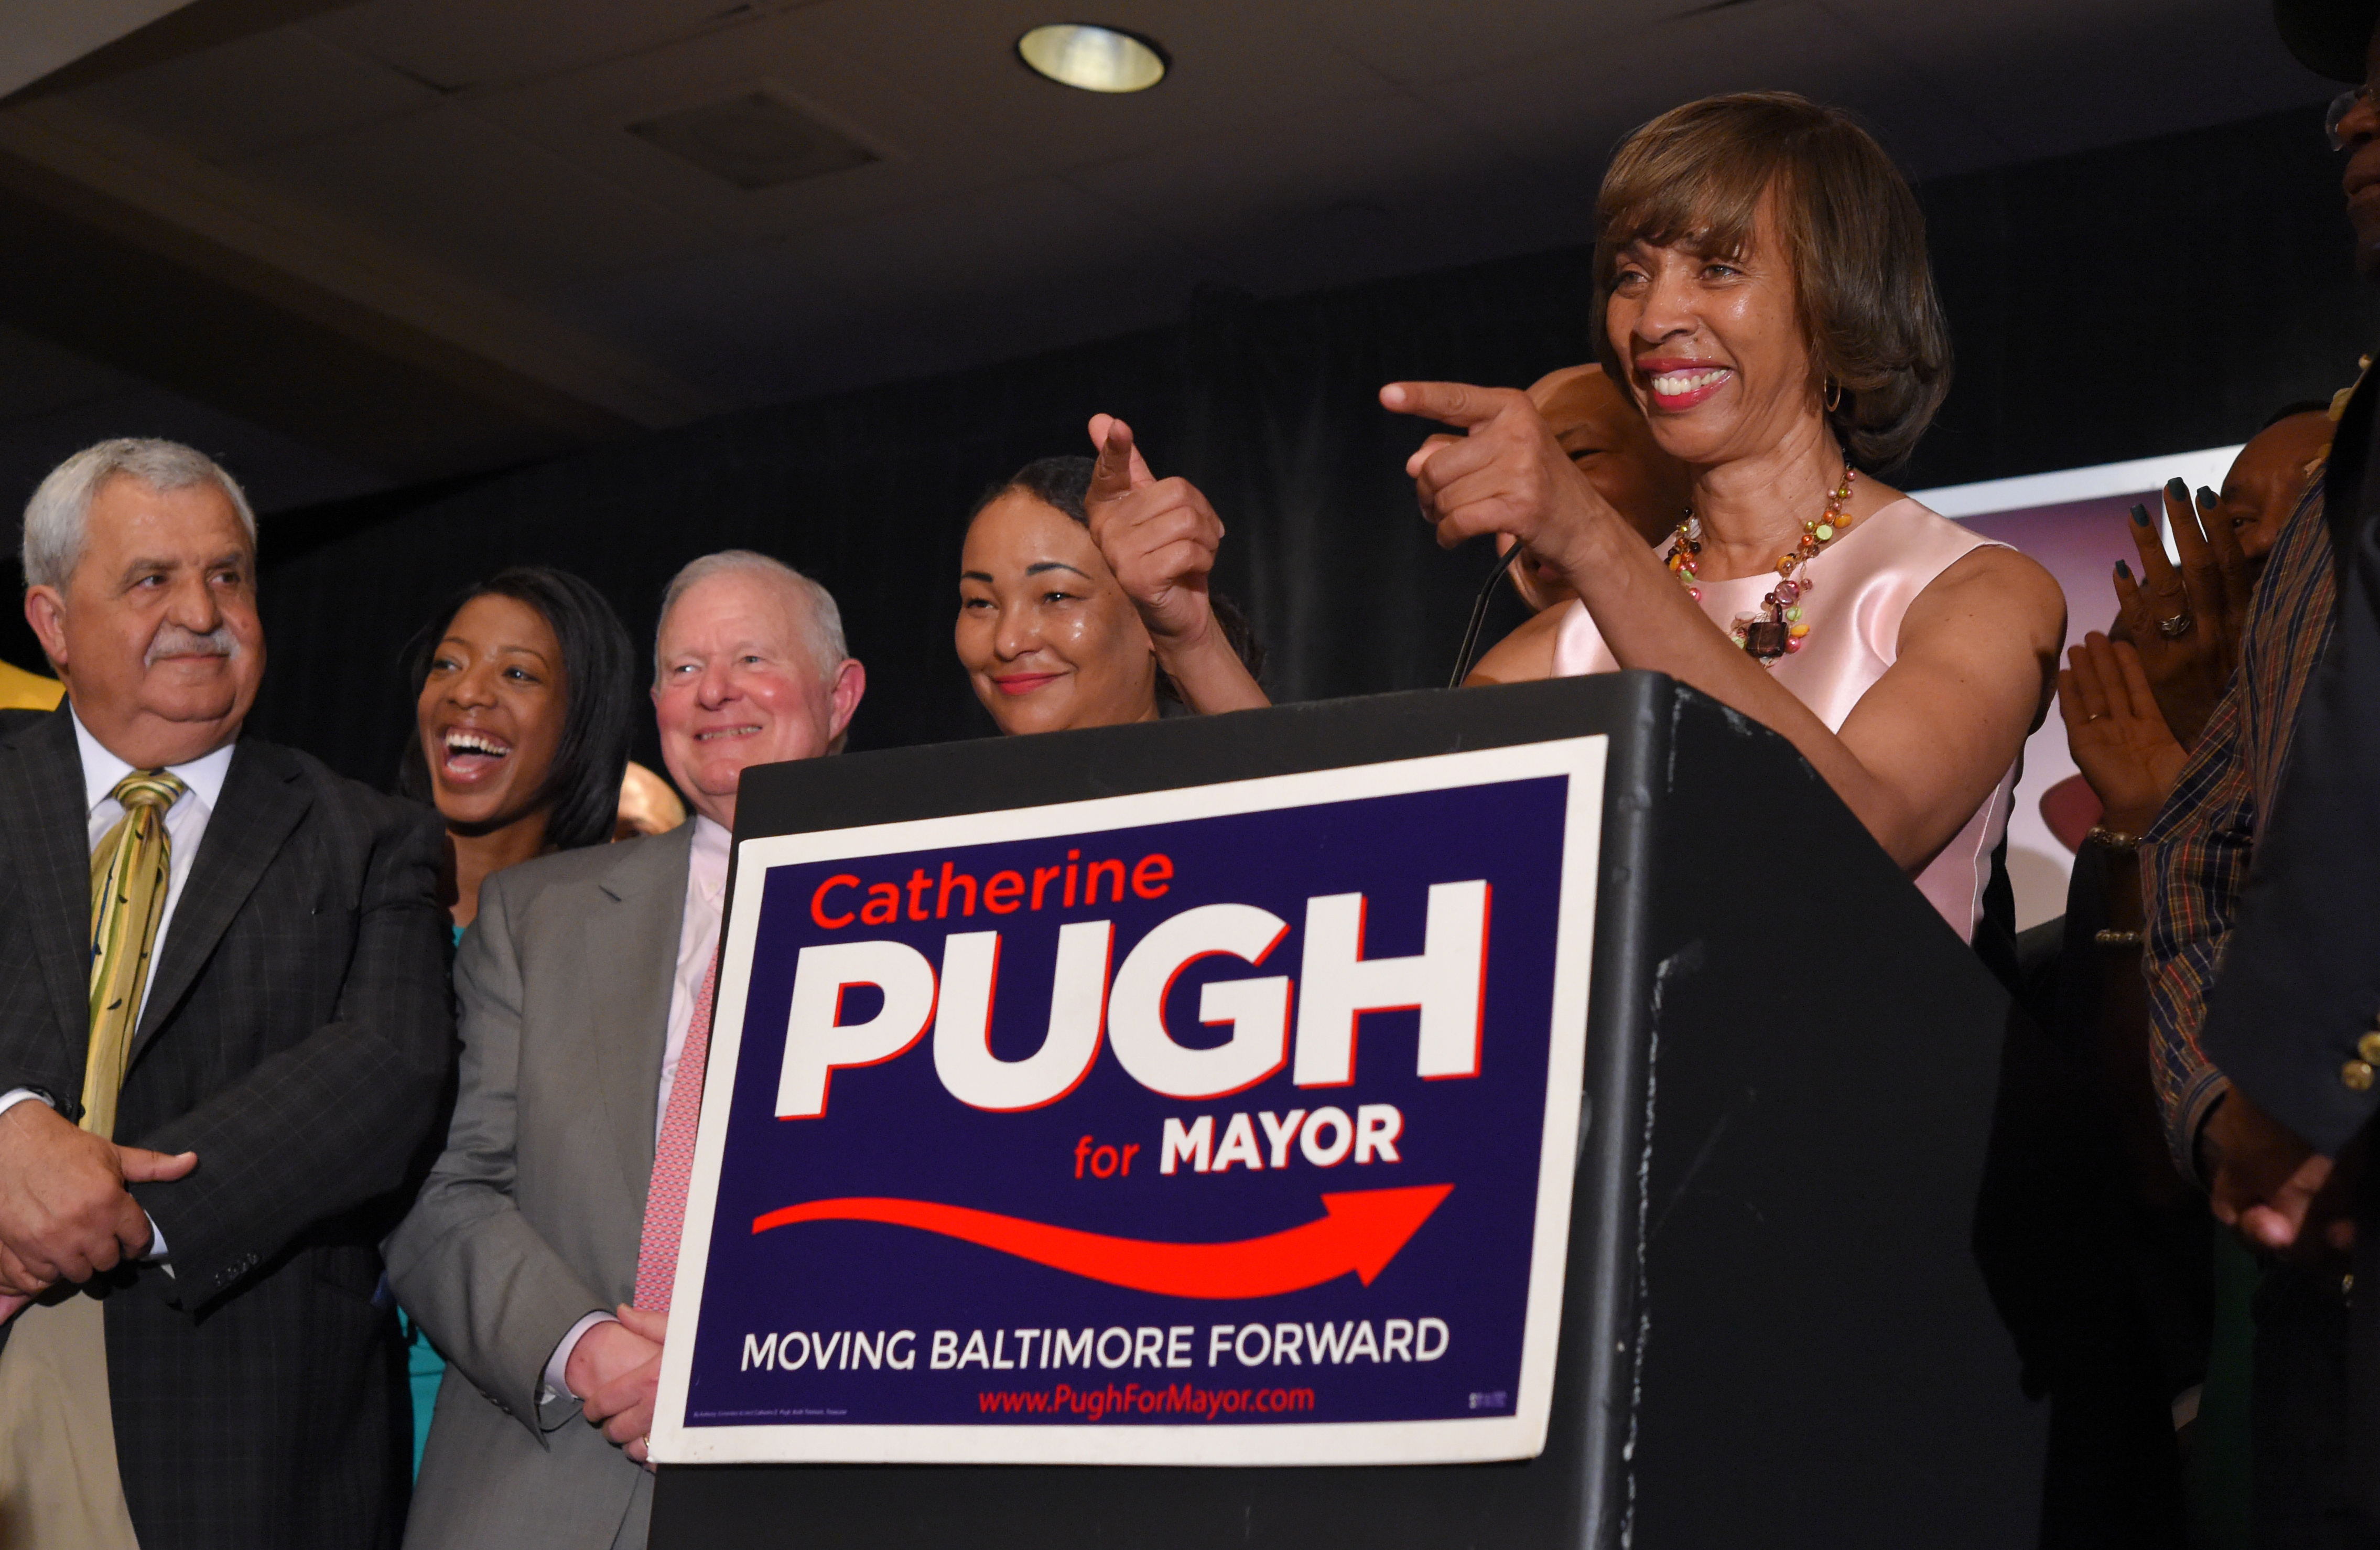 Maryland State Senator Catherine Pugh speaks on election night with her staff and supporters at the Baltimore Harbor Hotel on April 26, 2016. Pugh, a three-term state senator, won the Democratic nomination in Baltimore's mayoral race. (Lloyd Fox—AP)